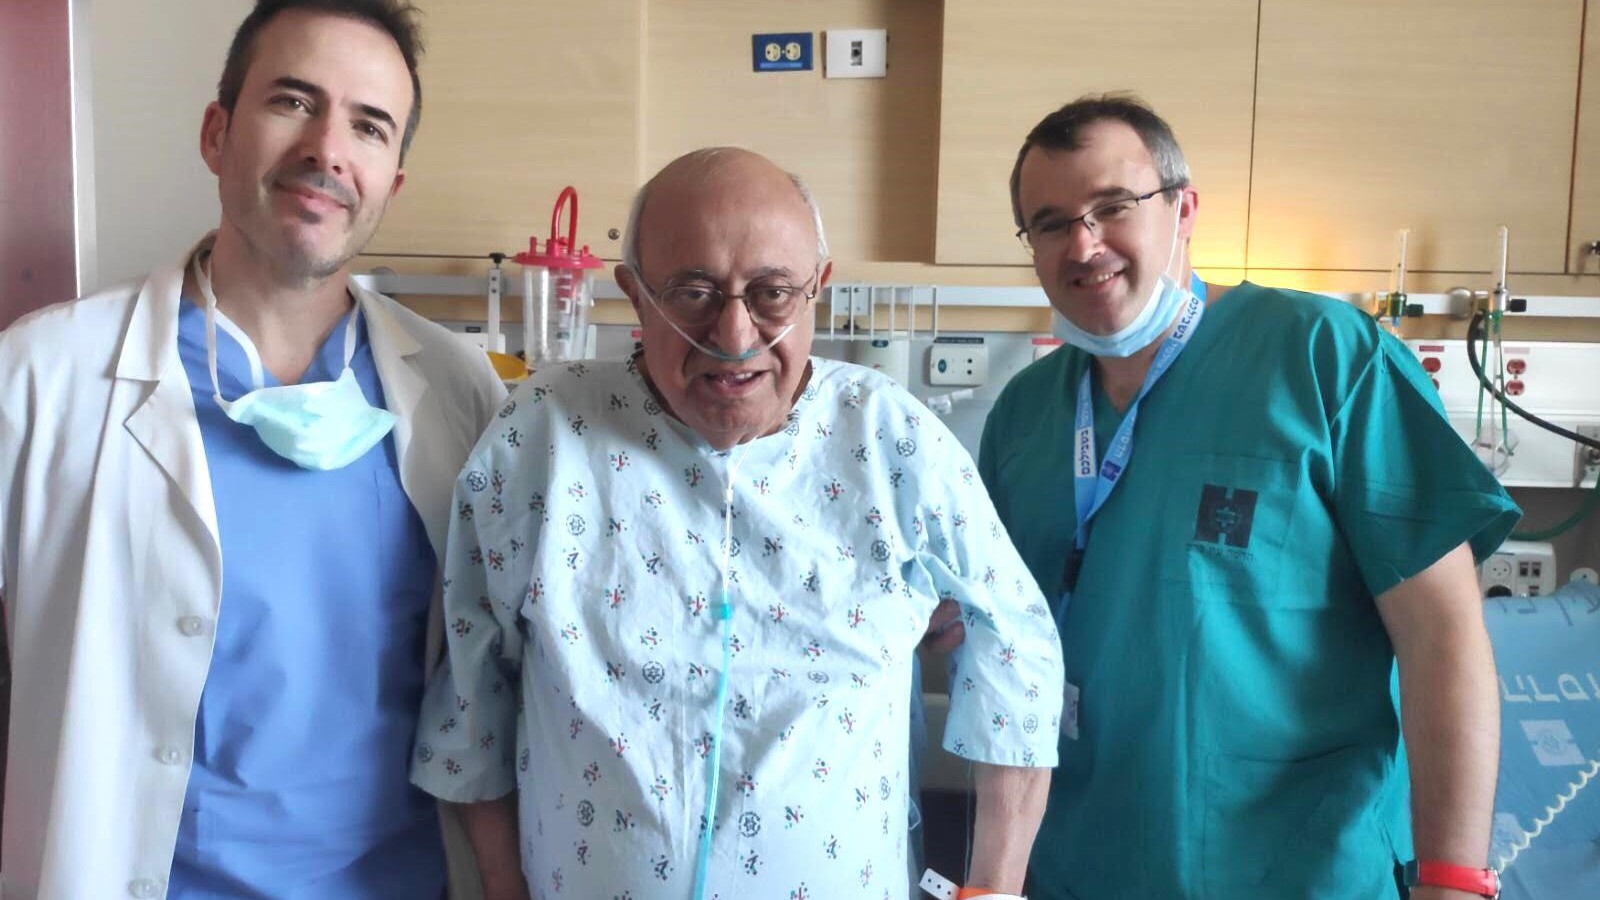 From left, Dr. José Cohen, David Avital and Dr. Josh E. Schroeder at Hadassah Medical Center after Avital’s local-anesthesia spinal surgery. Photo courtesy of Hadassah